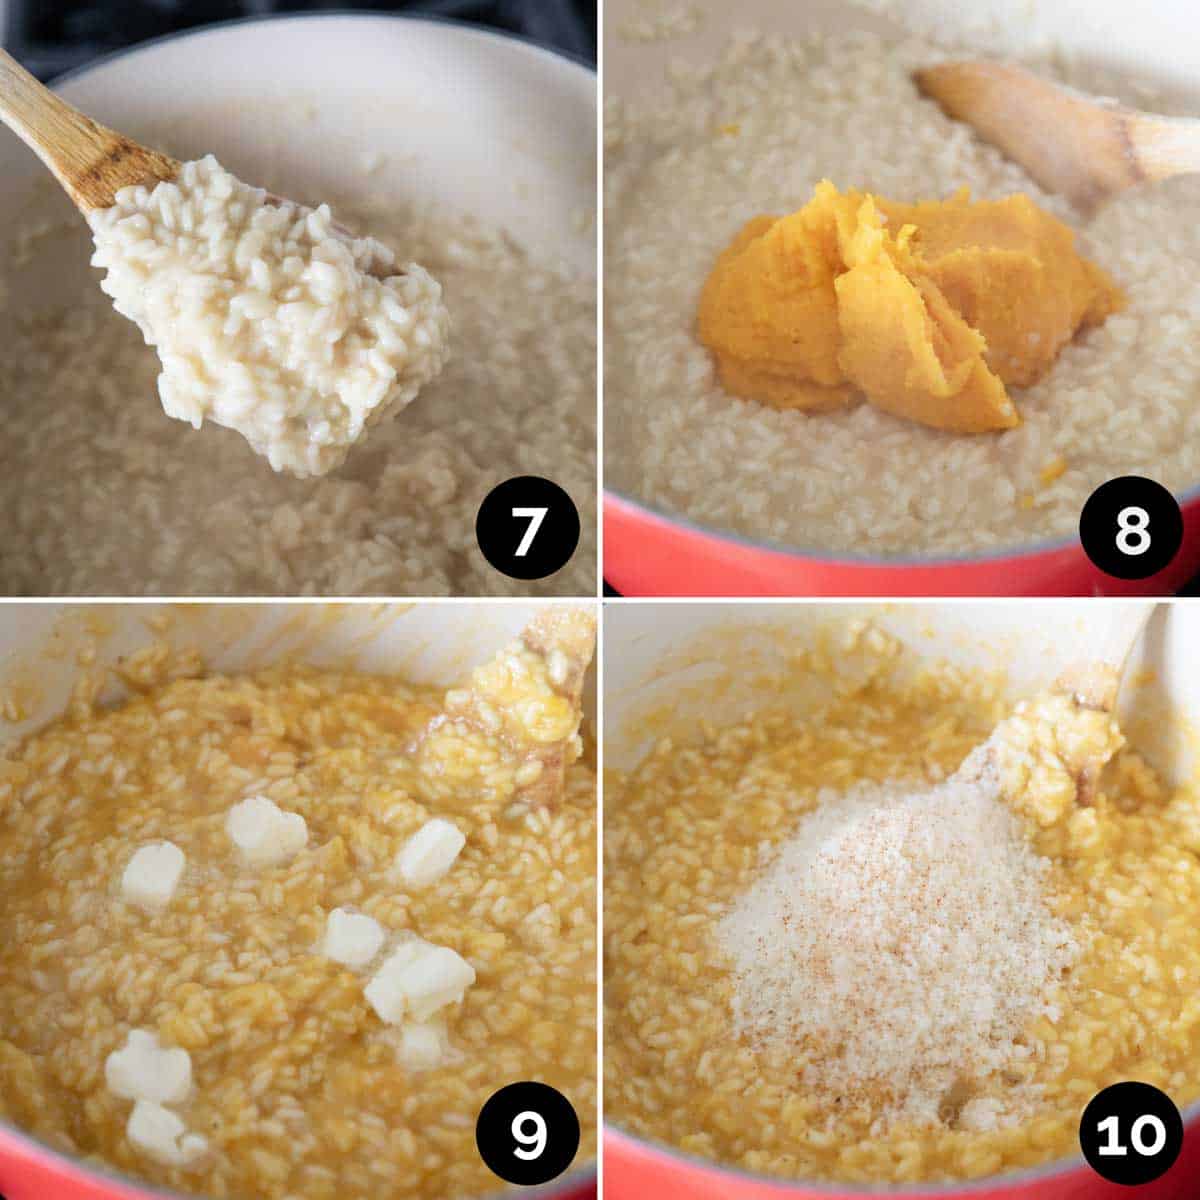 Step by step photos showing how to make butternut squash risotto - stirring in broth, adding squash puree, adding butter, and parmesan.